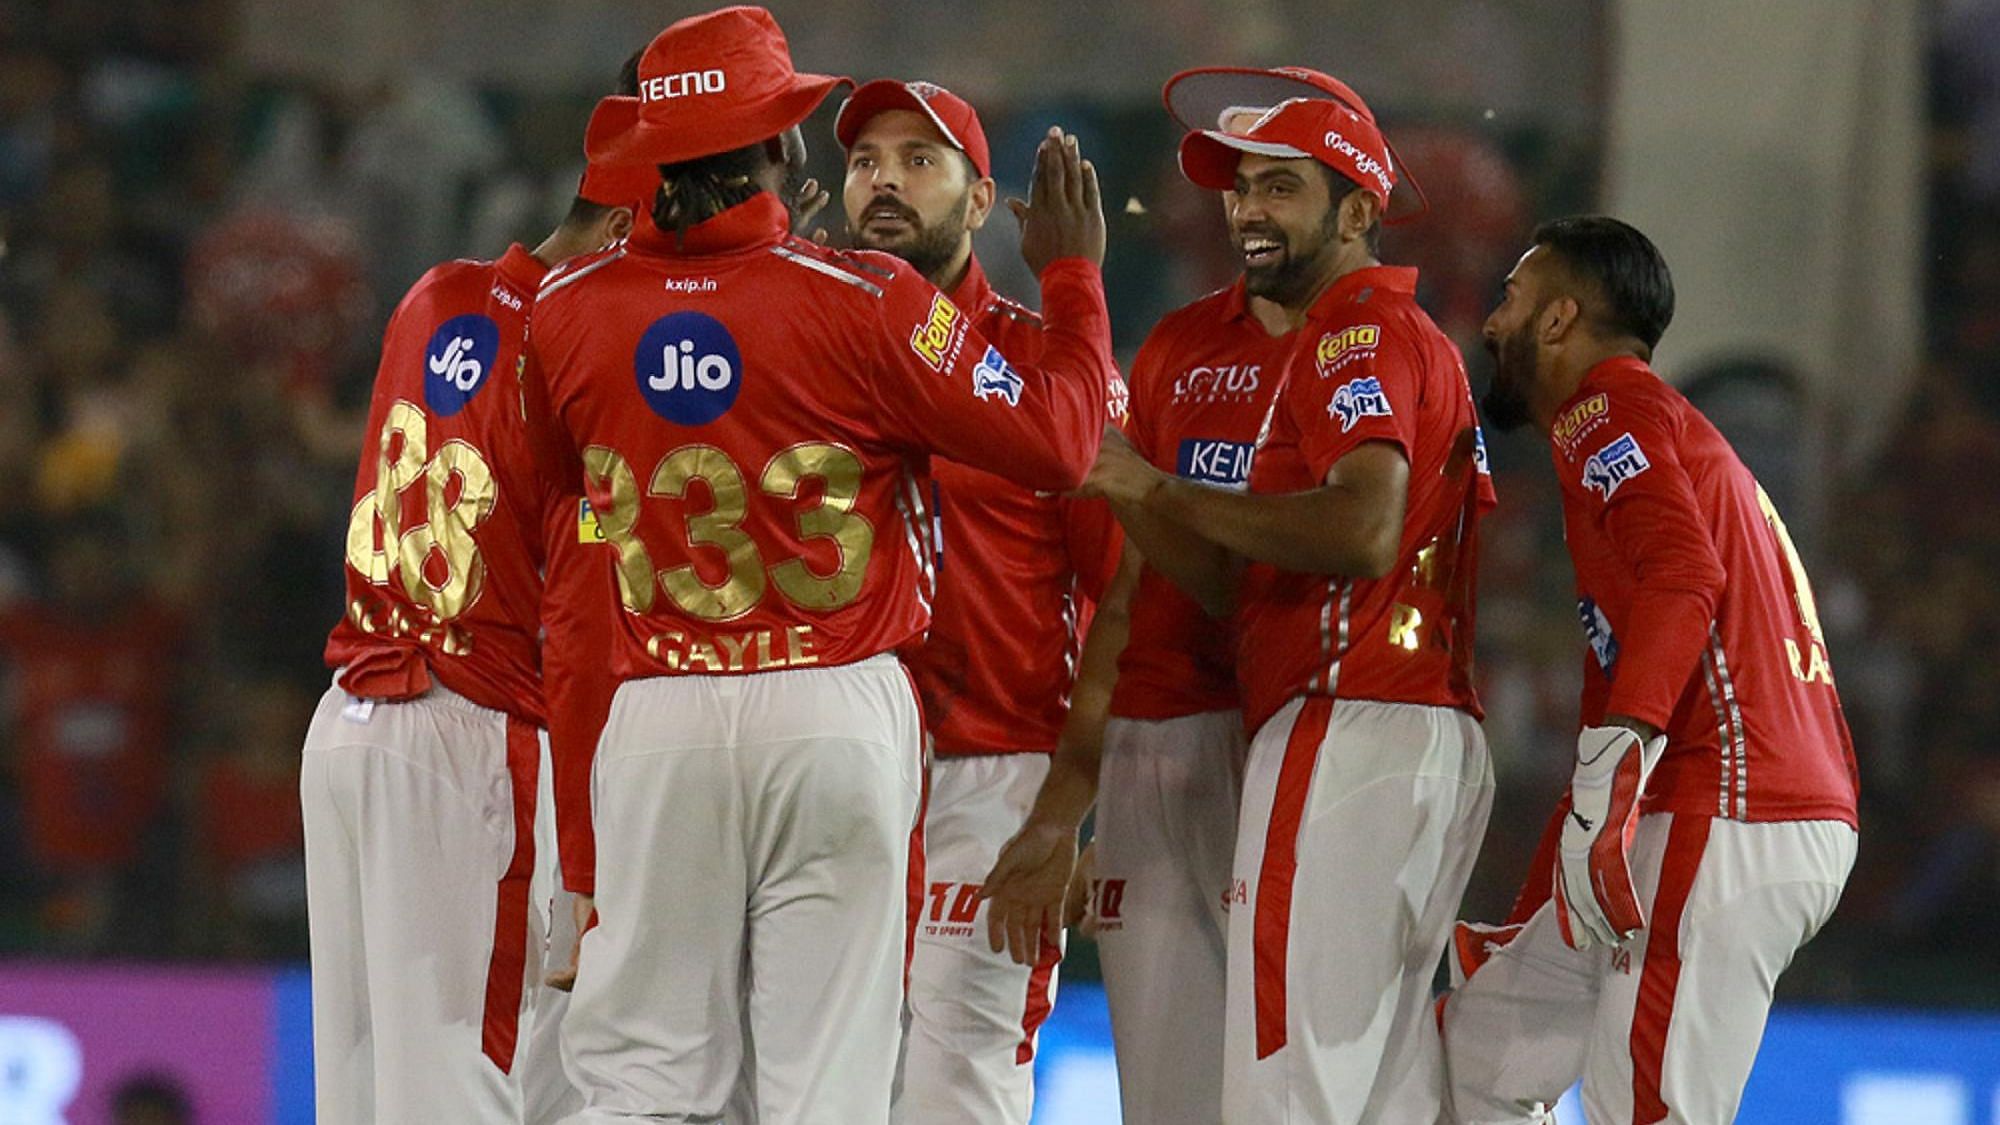 Kings XI Punjab have retained only 10 players from their 2018 squad ahead of the IPL 2019 Auction on 18 December.